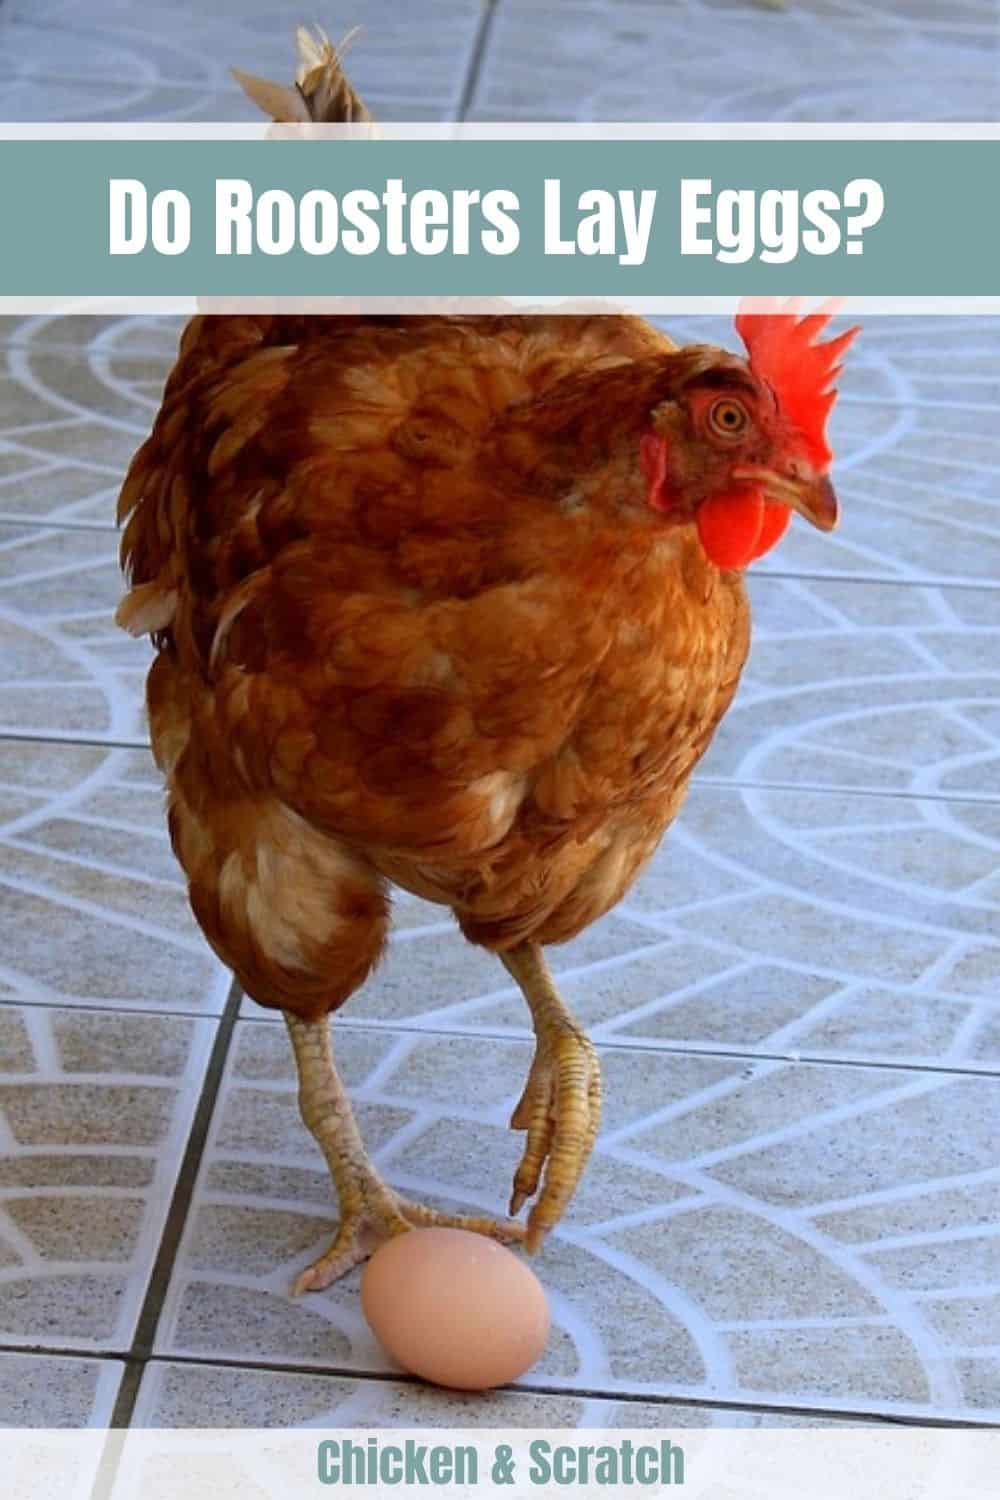 What Causes A Rooster To Lay An Egg?